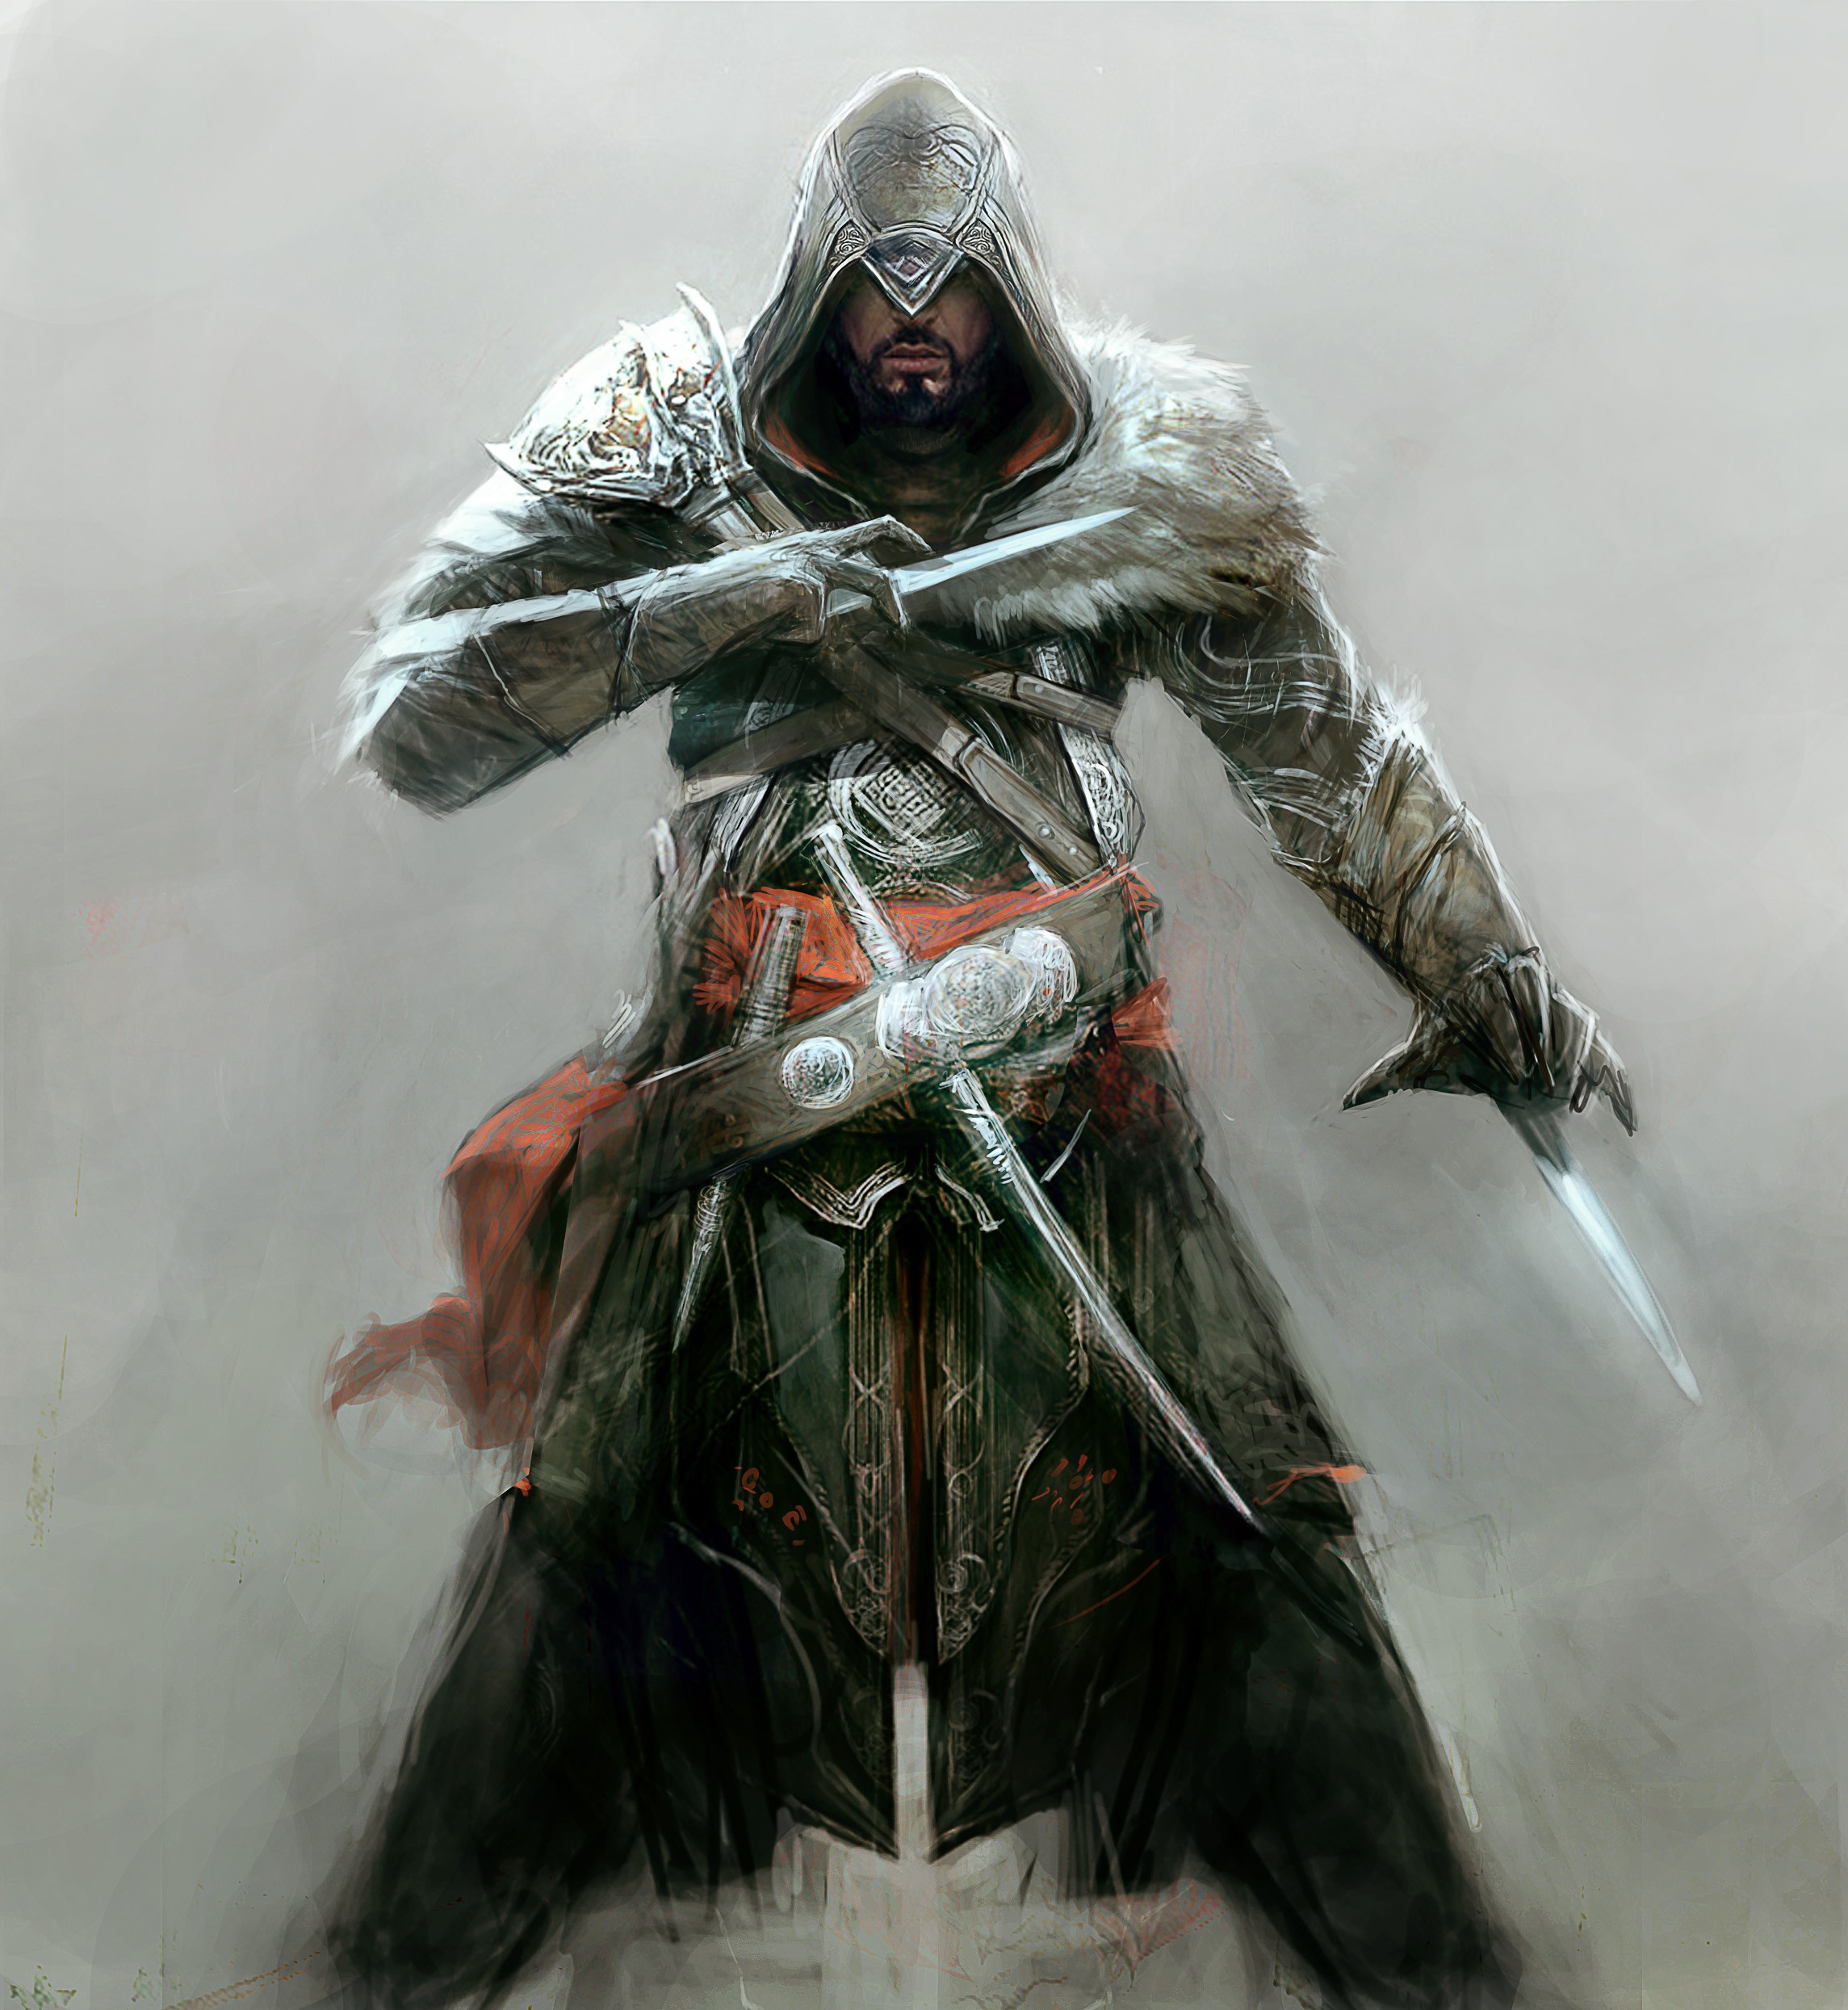 Assassin's Creed Revelations Preview - Combat Trailer Arrives For Assassin's  Creed Revelations - Game Informer